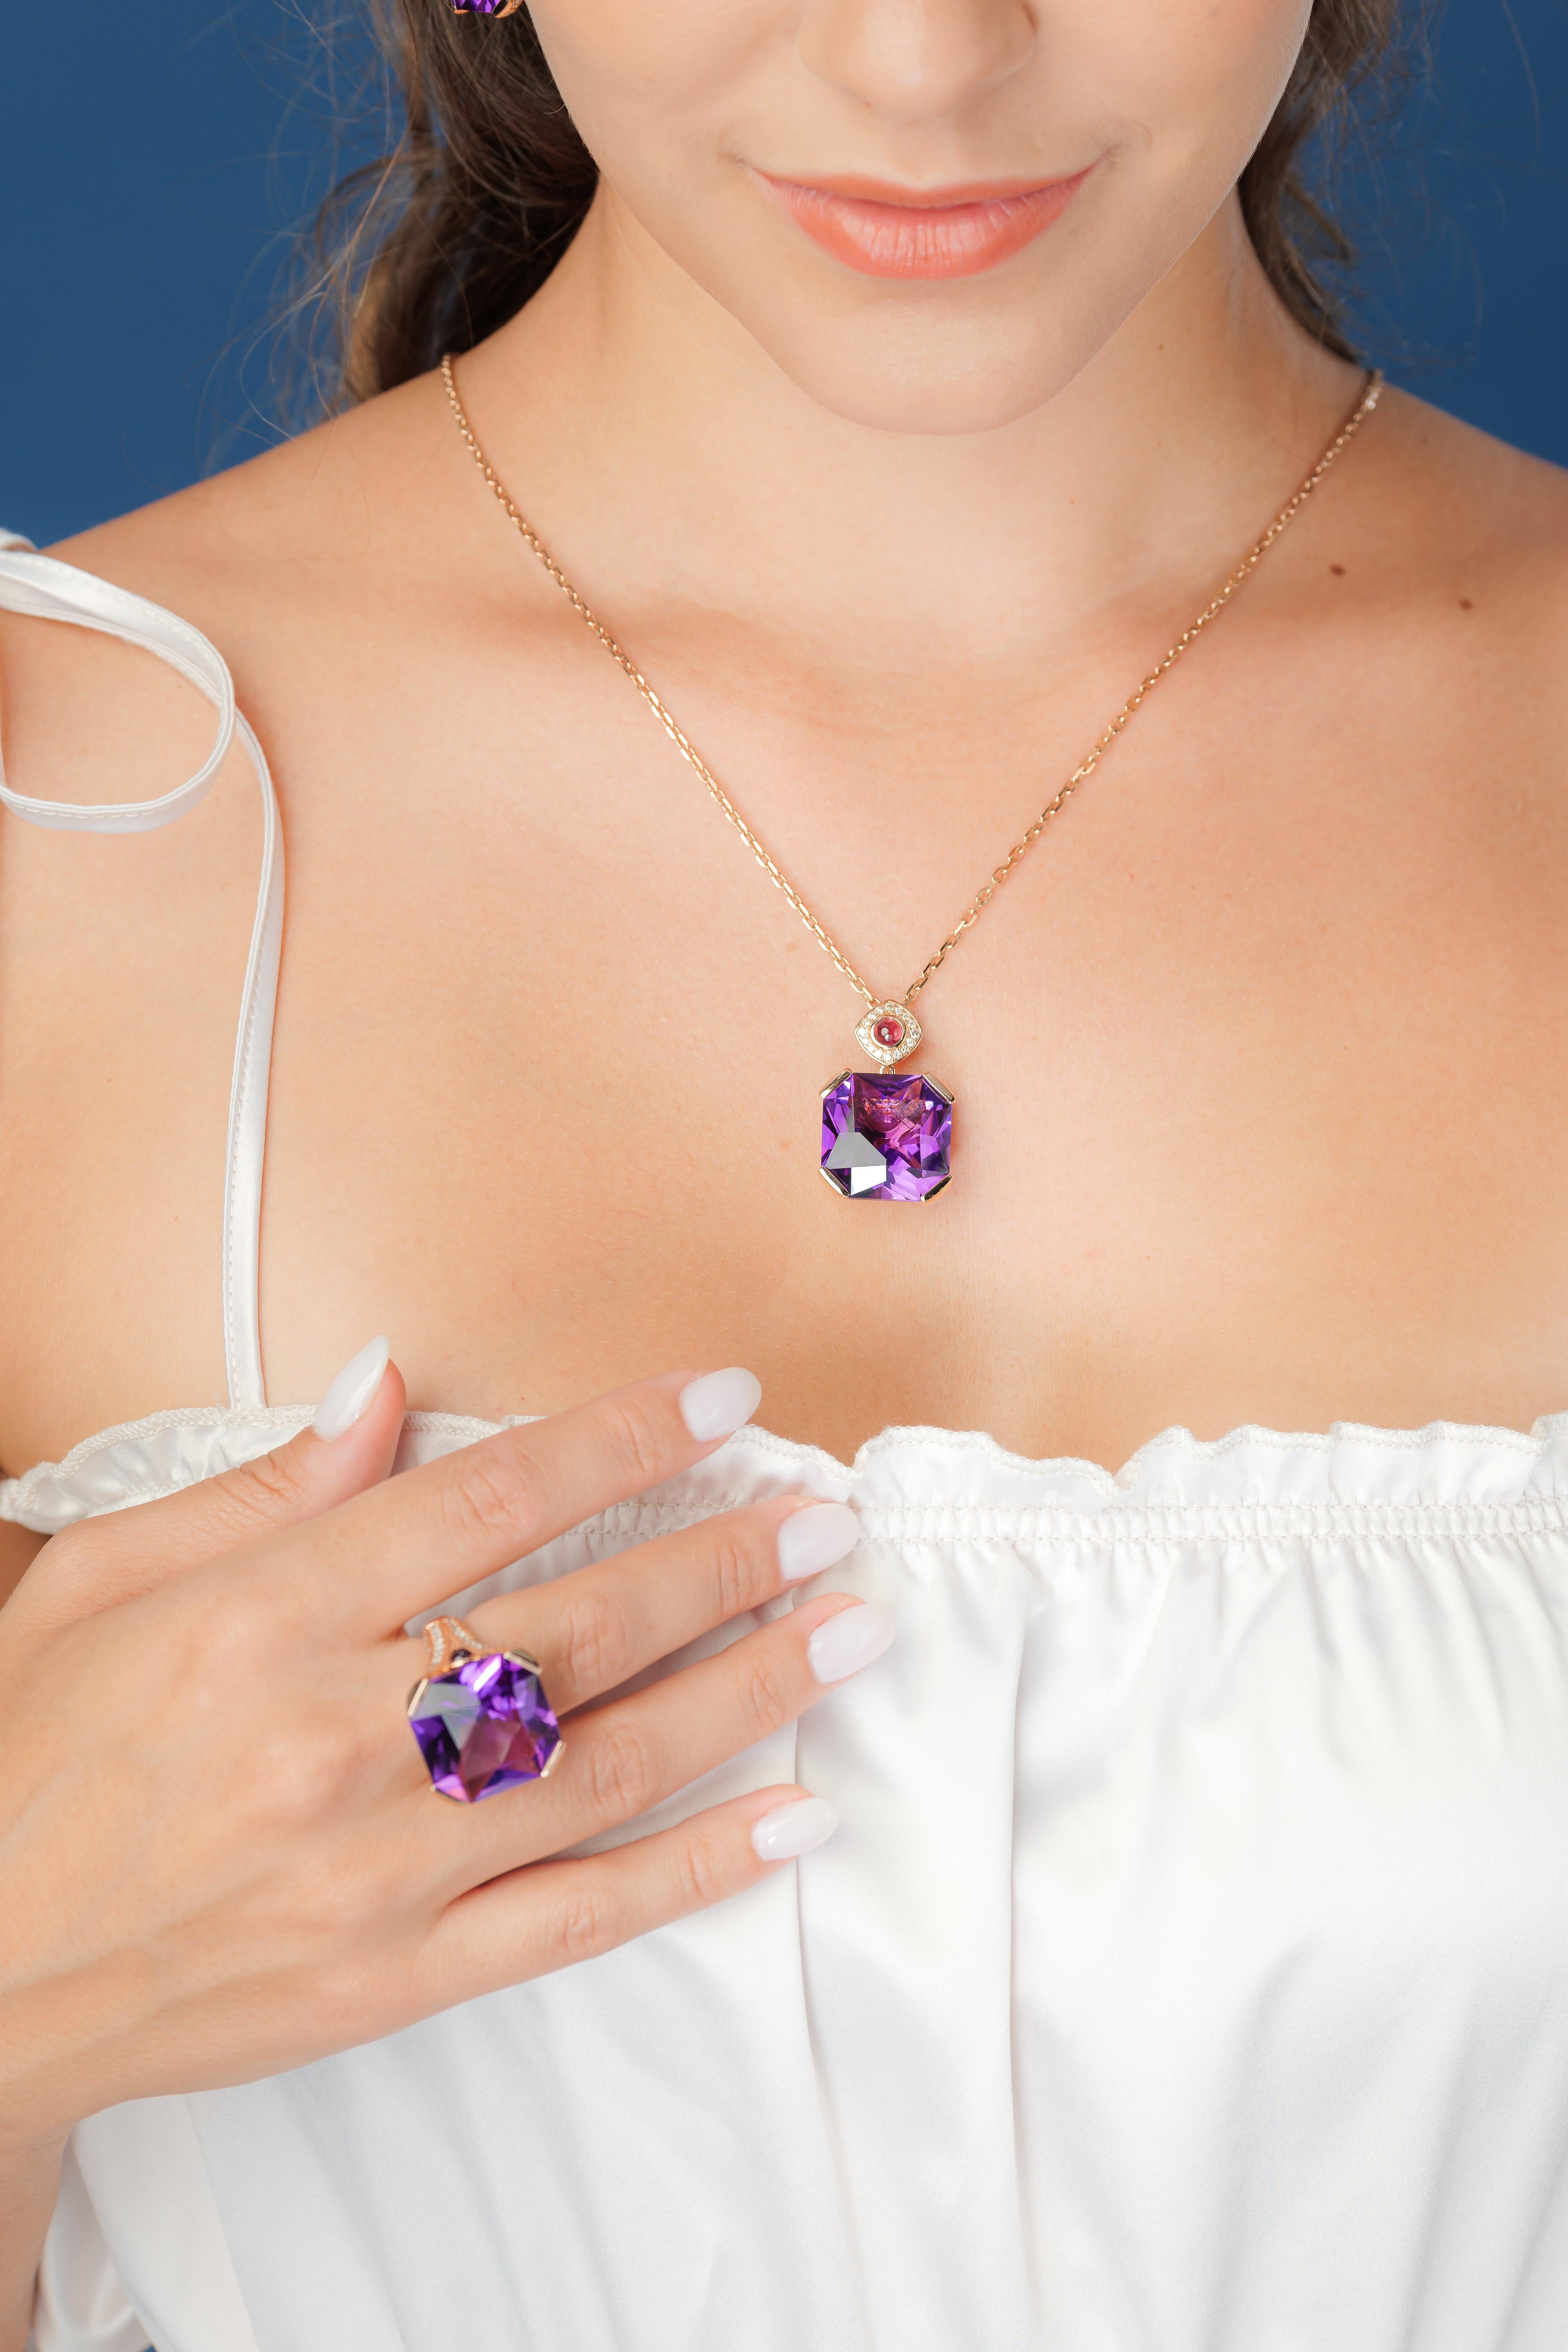 Sunita Nahata presents a collection of alluring amethysts. Amethysts are particularly known to bring powerful energies to Aquarians or those born in February. In general it is said to calm and de-stress wearers, and alleviate all negativity. This is